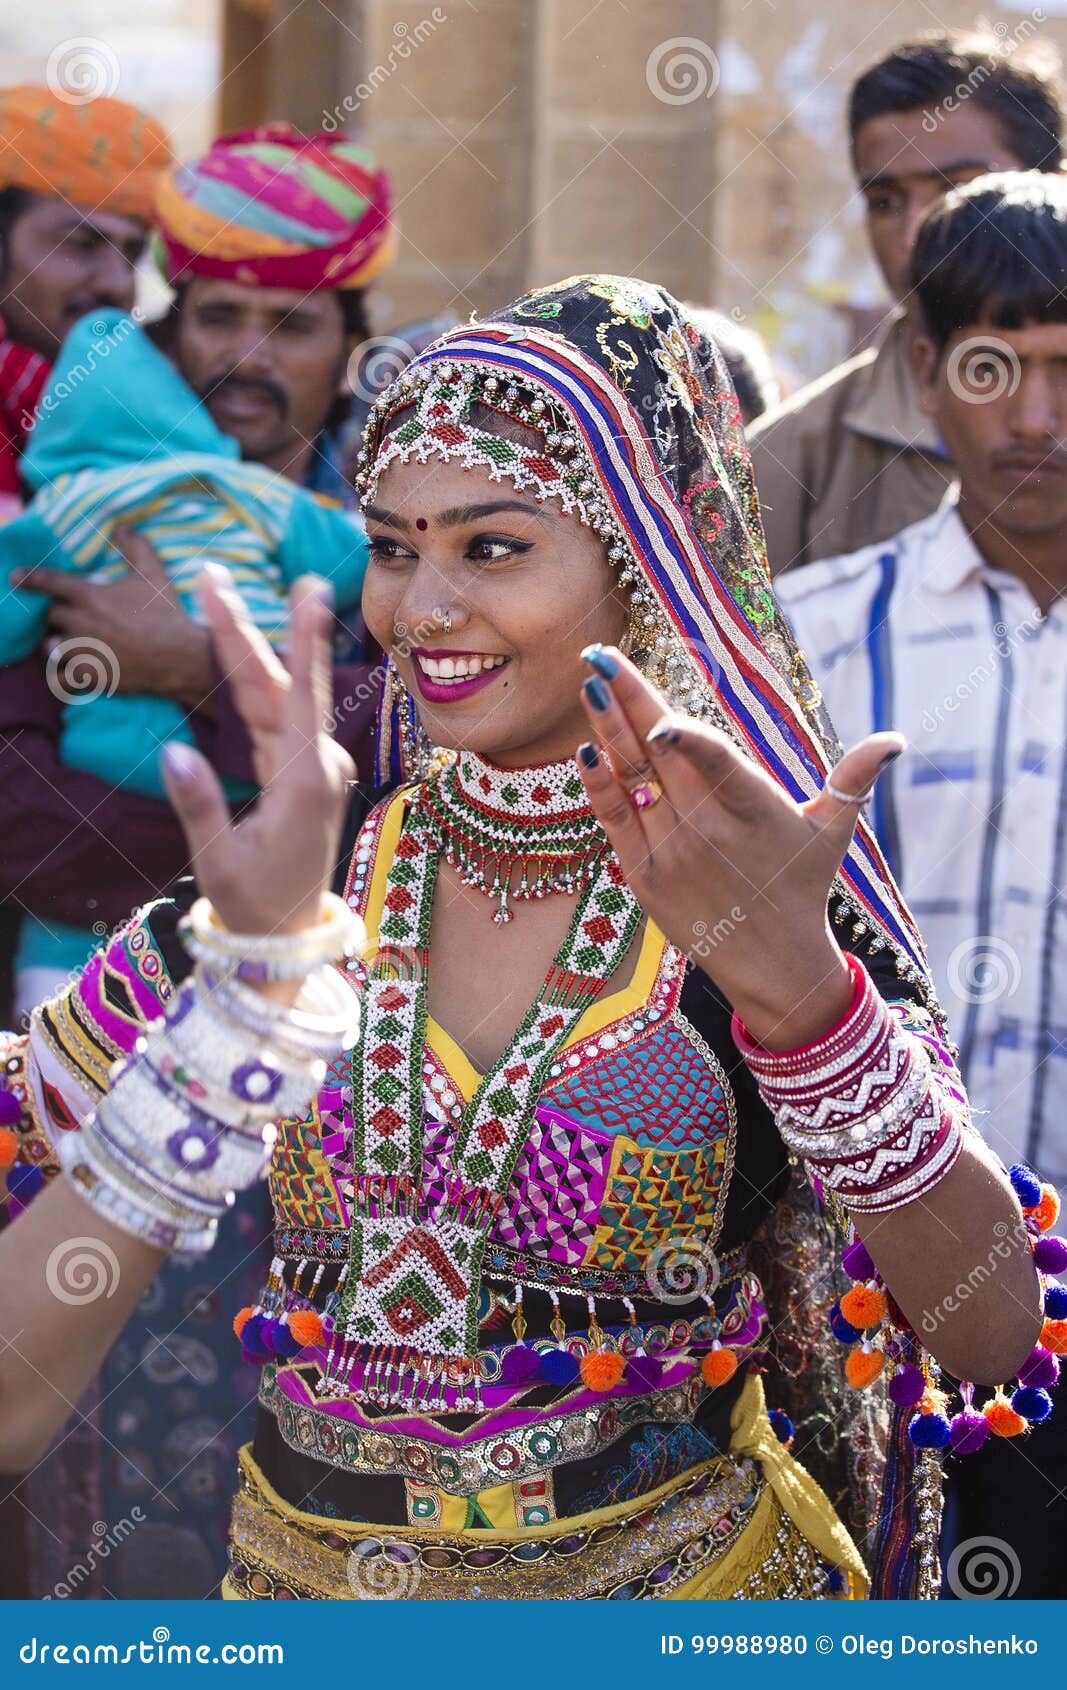 Indian Girl Wearing Traditional Rajasthani Dress Participate in ...